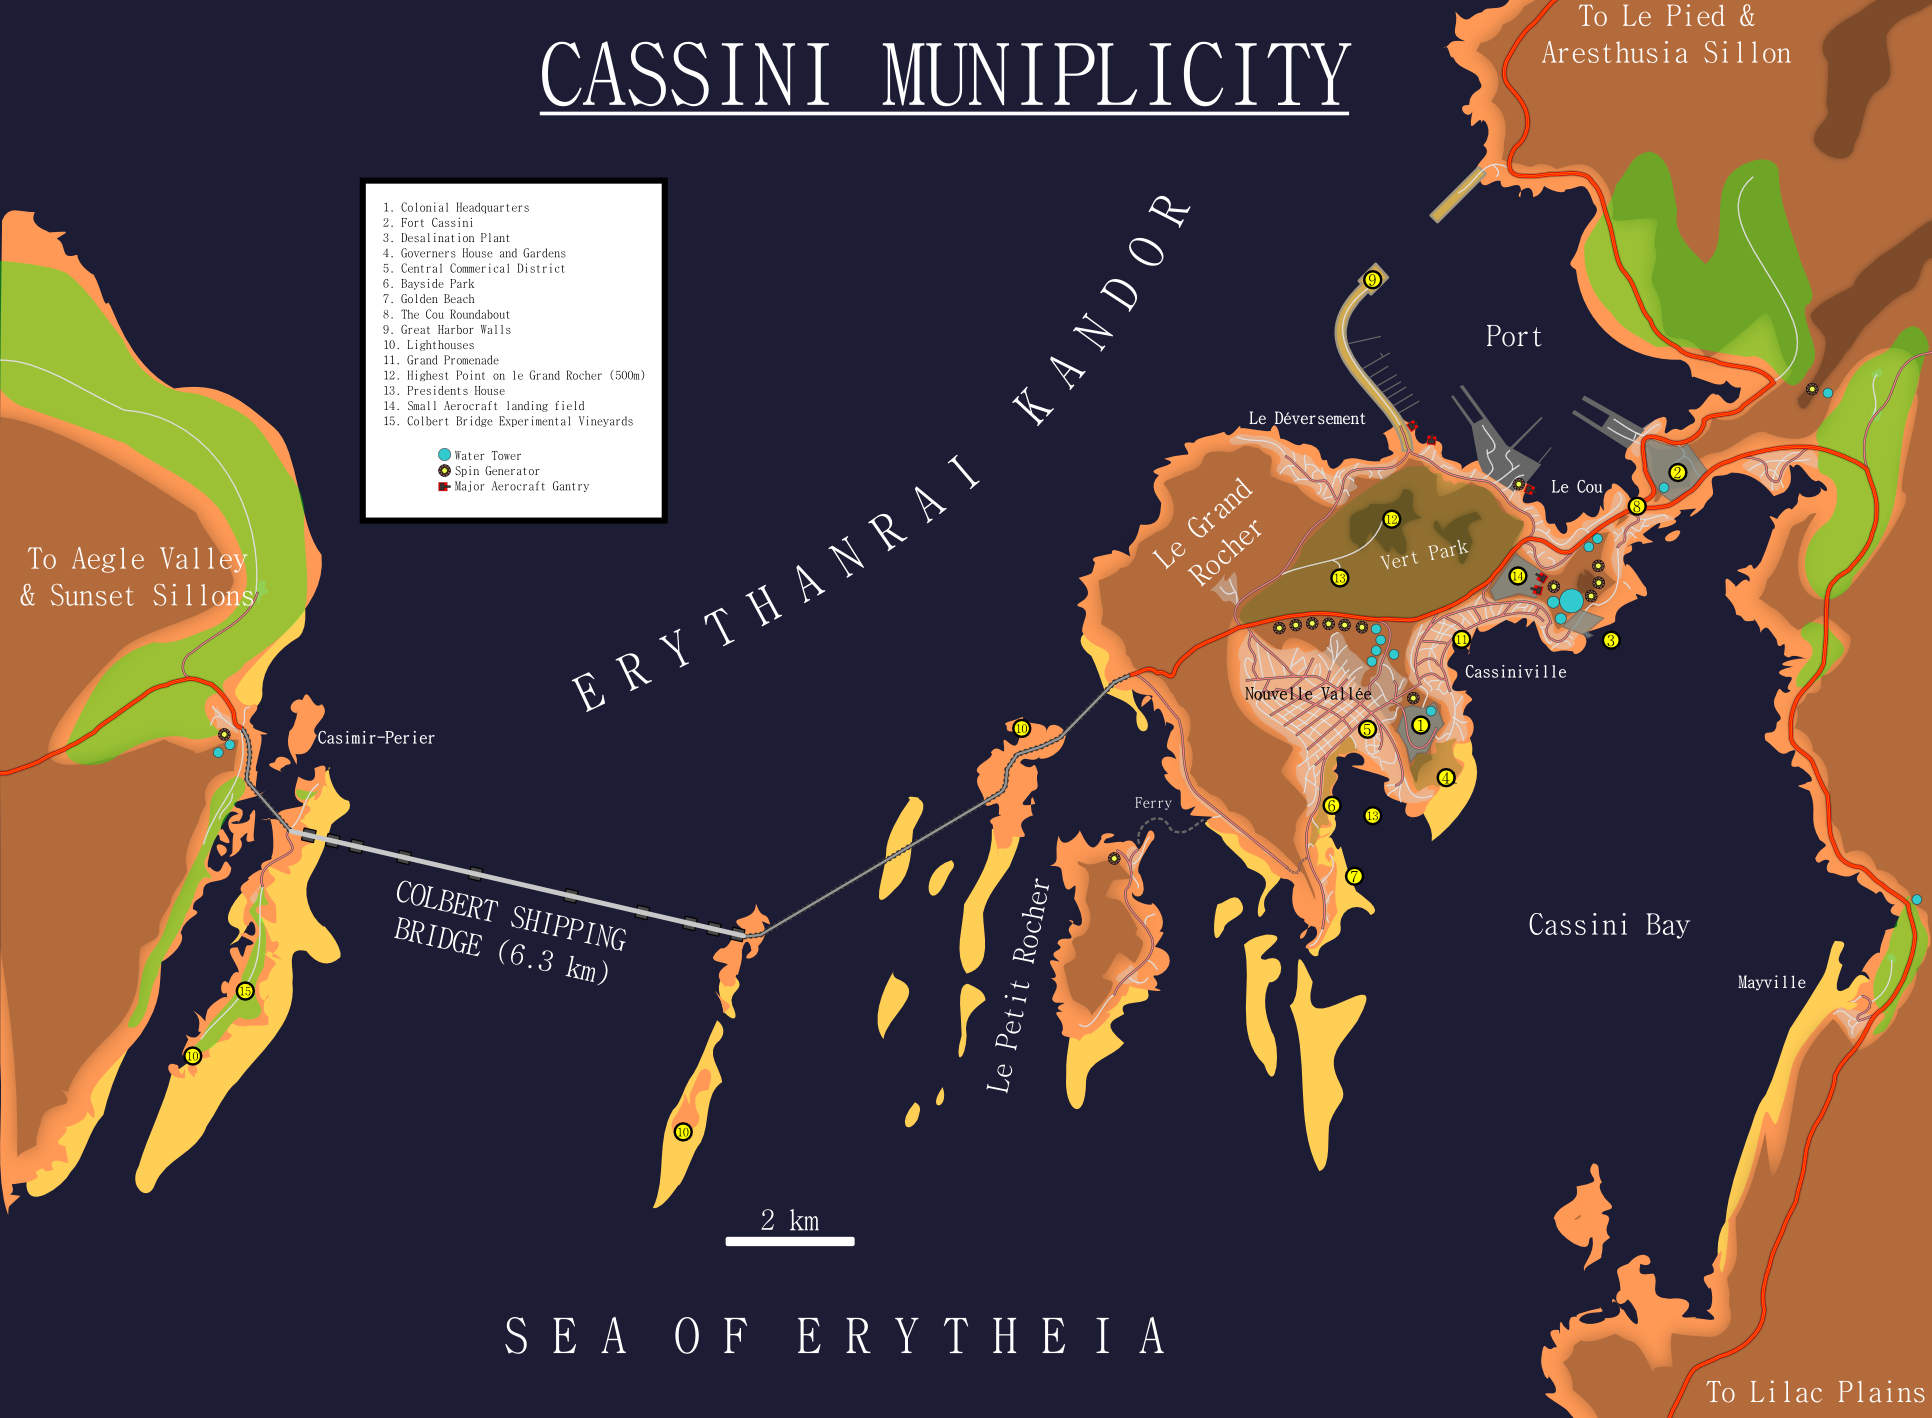 cassini_city_by_iainfluff-d463n6h.png